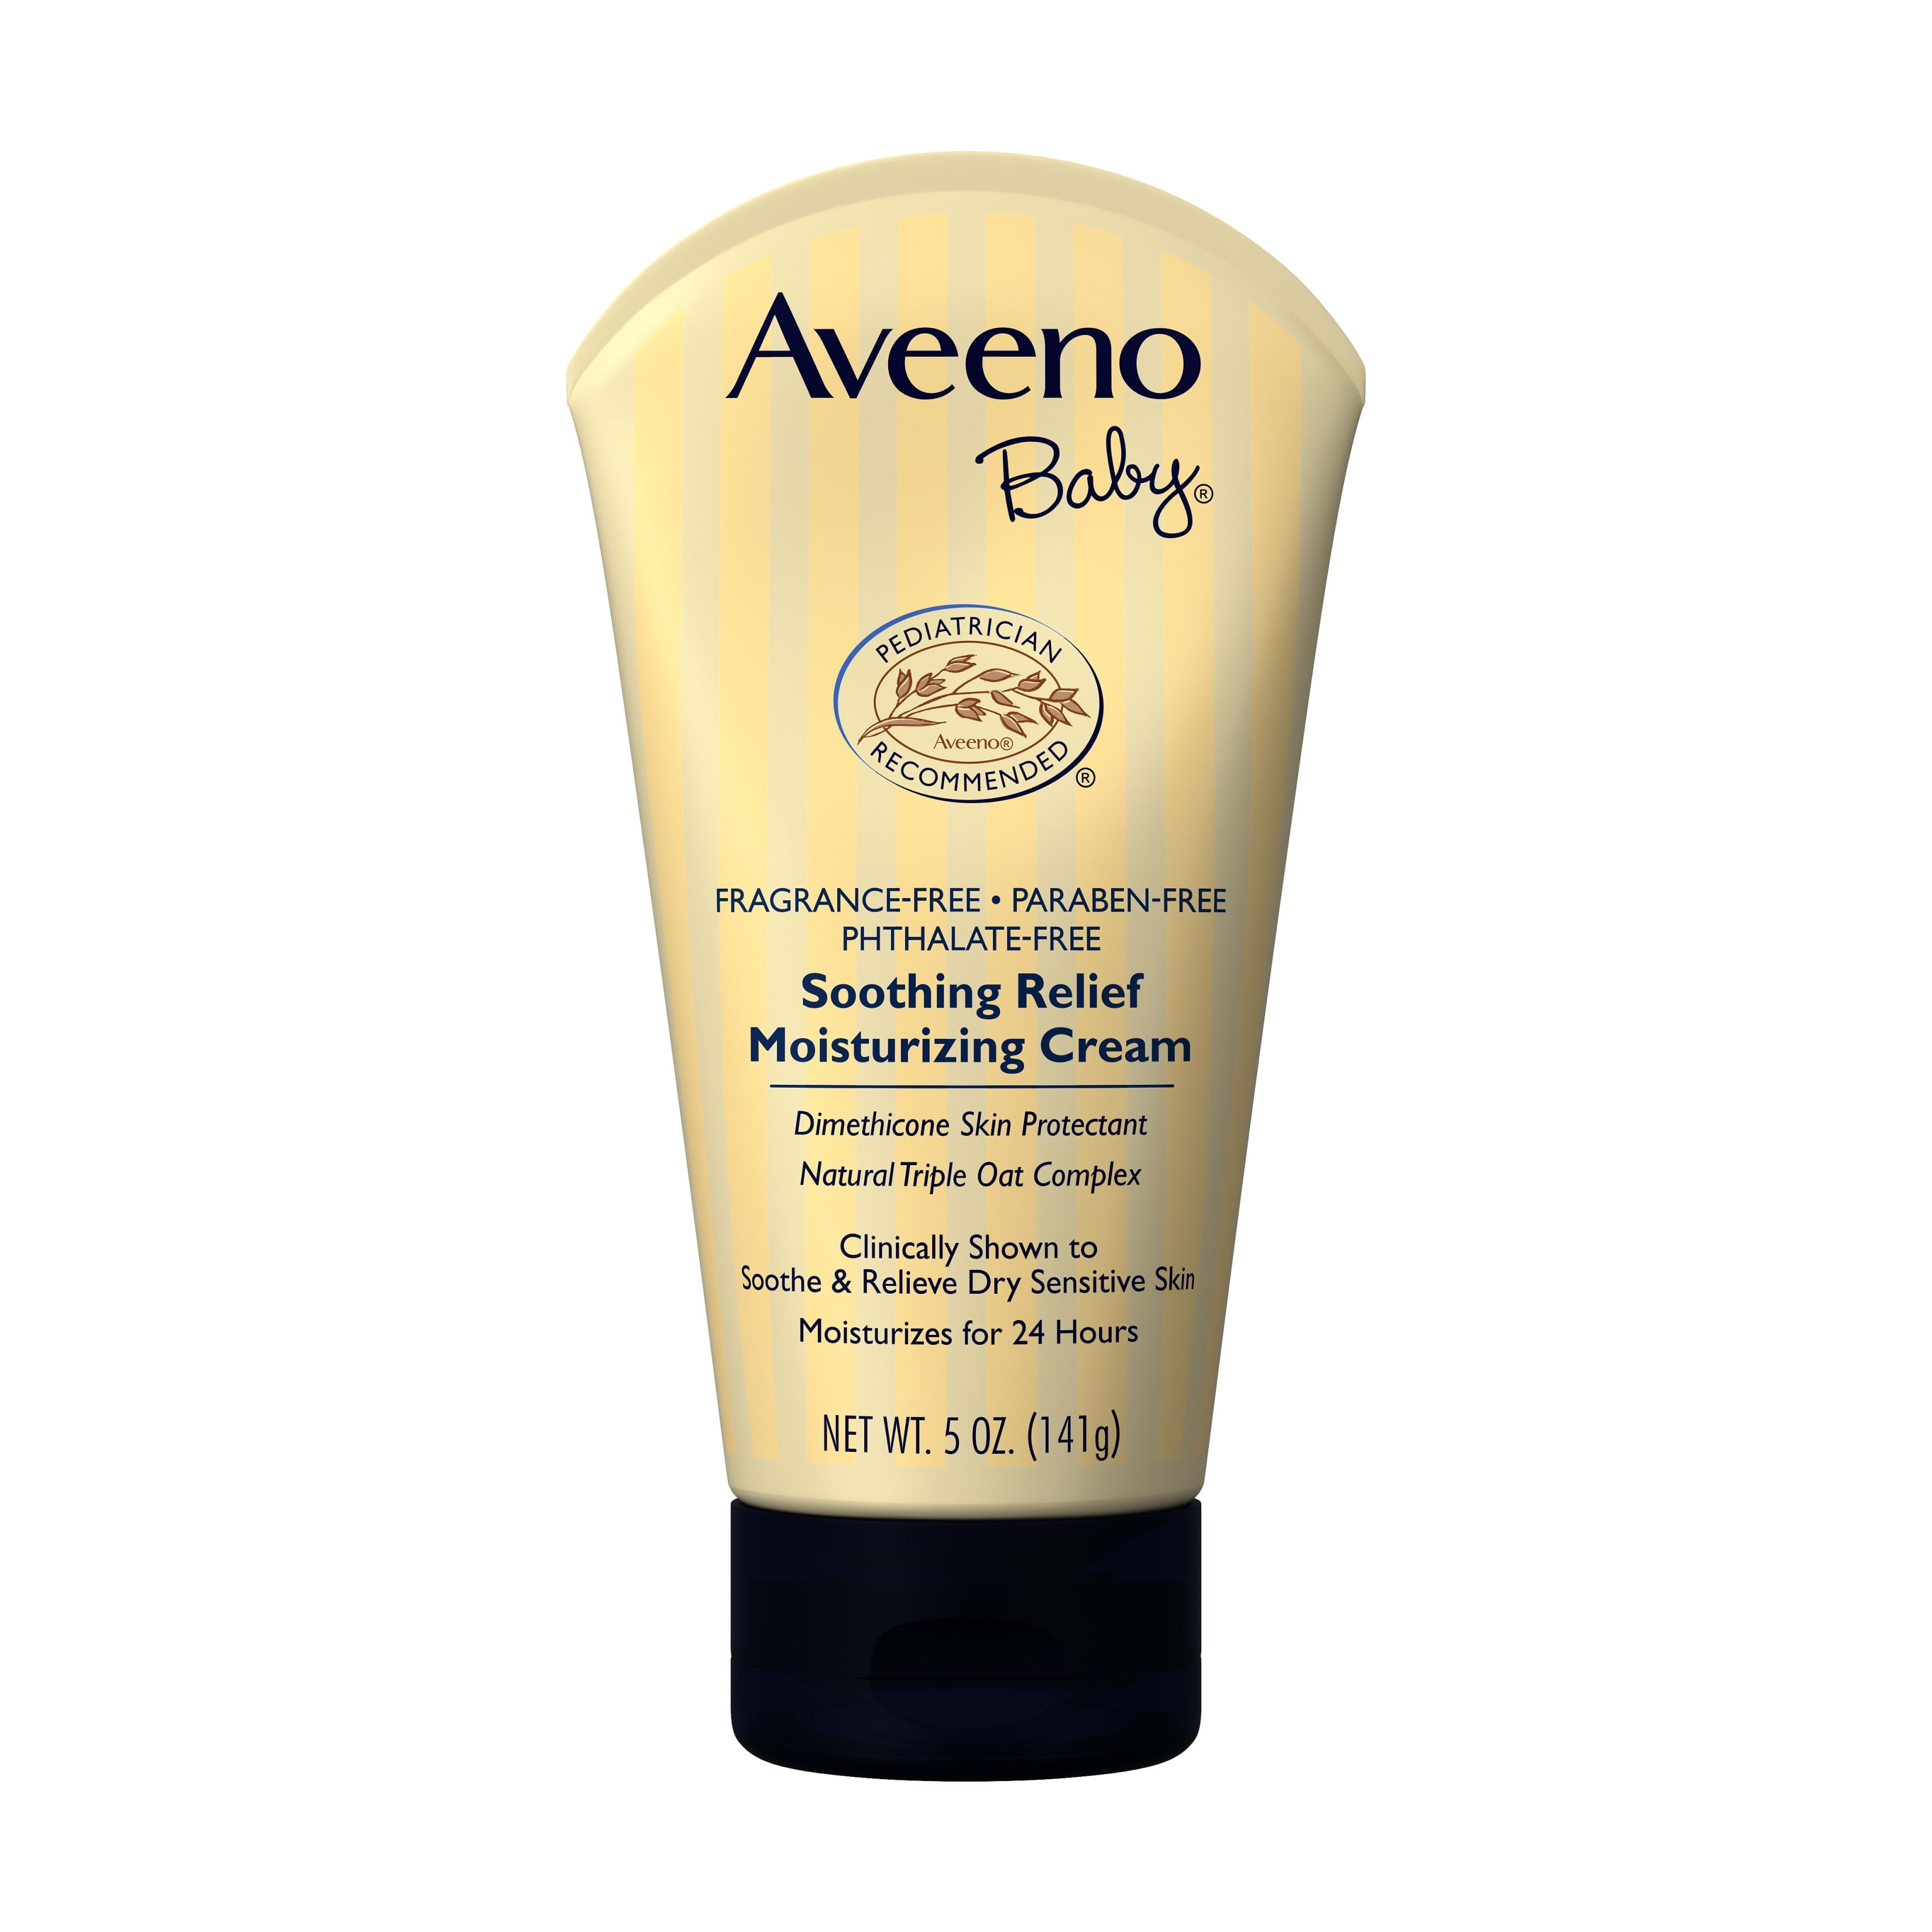 Aveeno Baby Soothing Relief Moisturizing Cream, Oat Complex, 5 oz